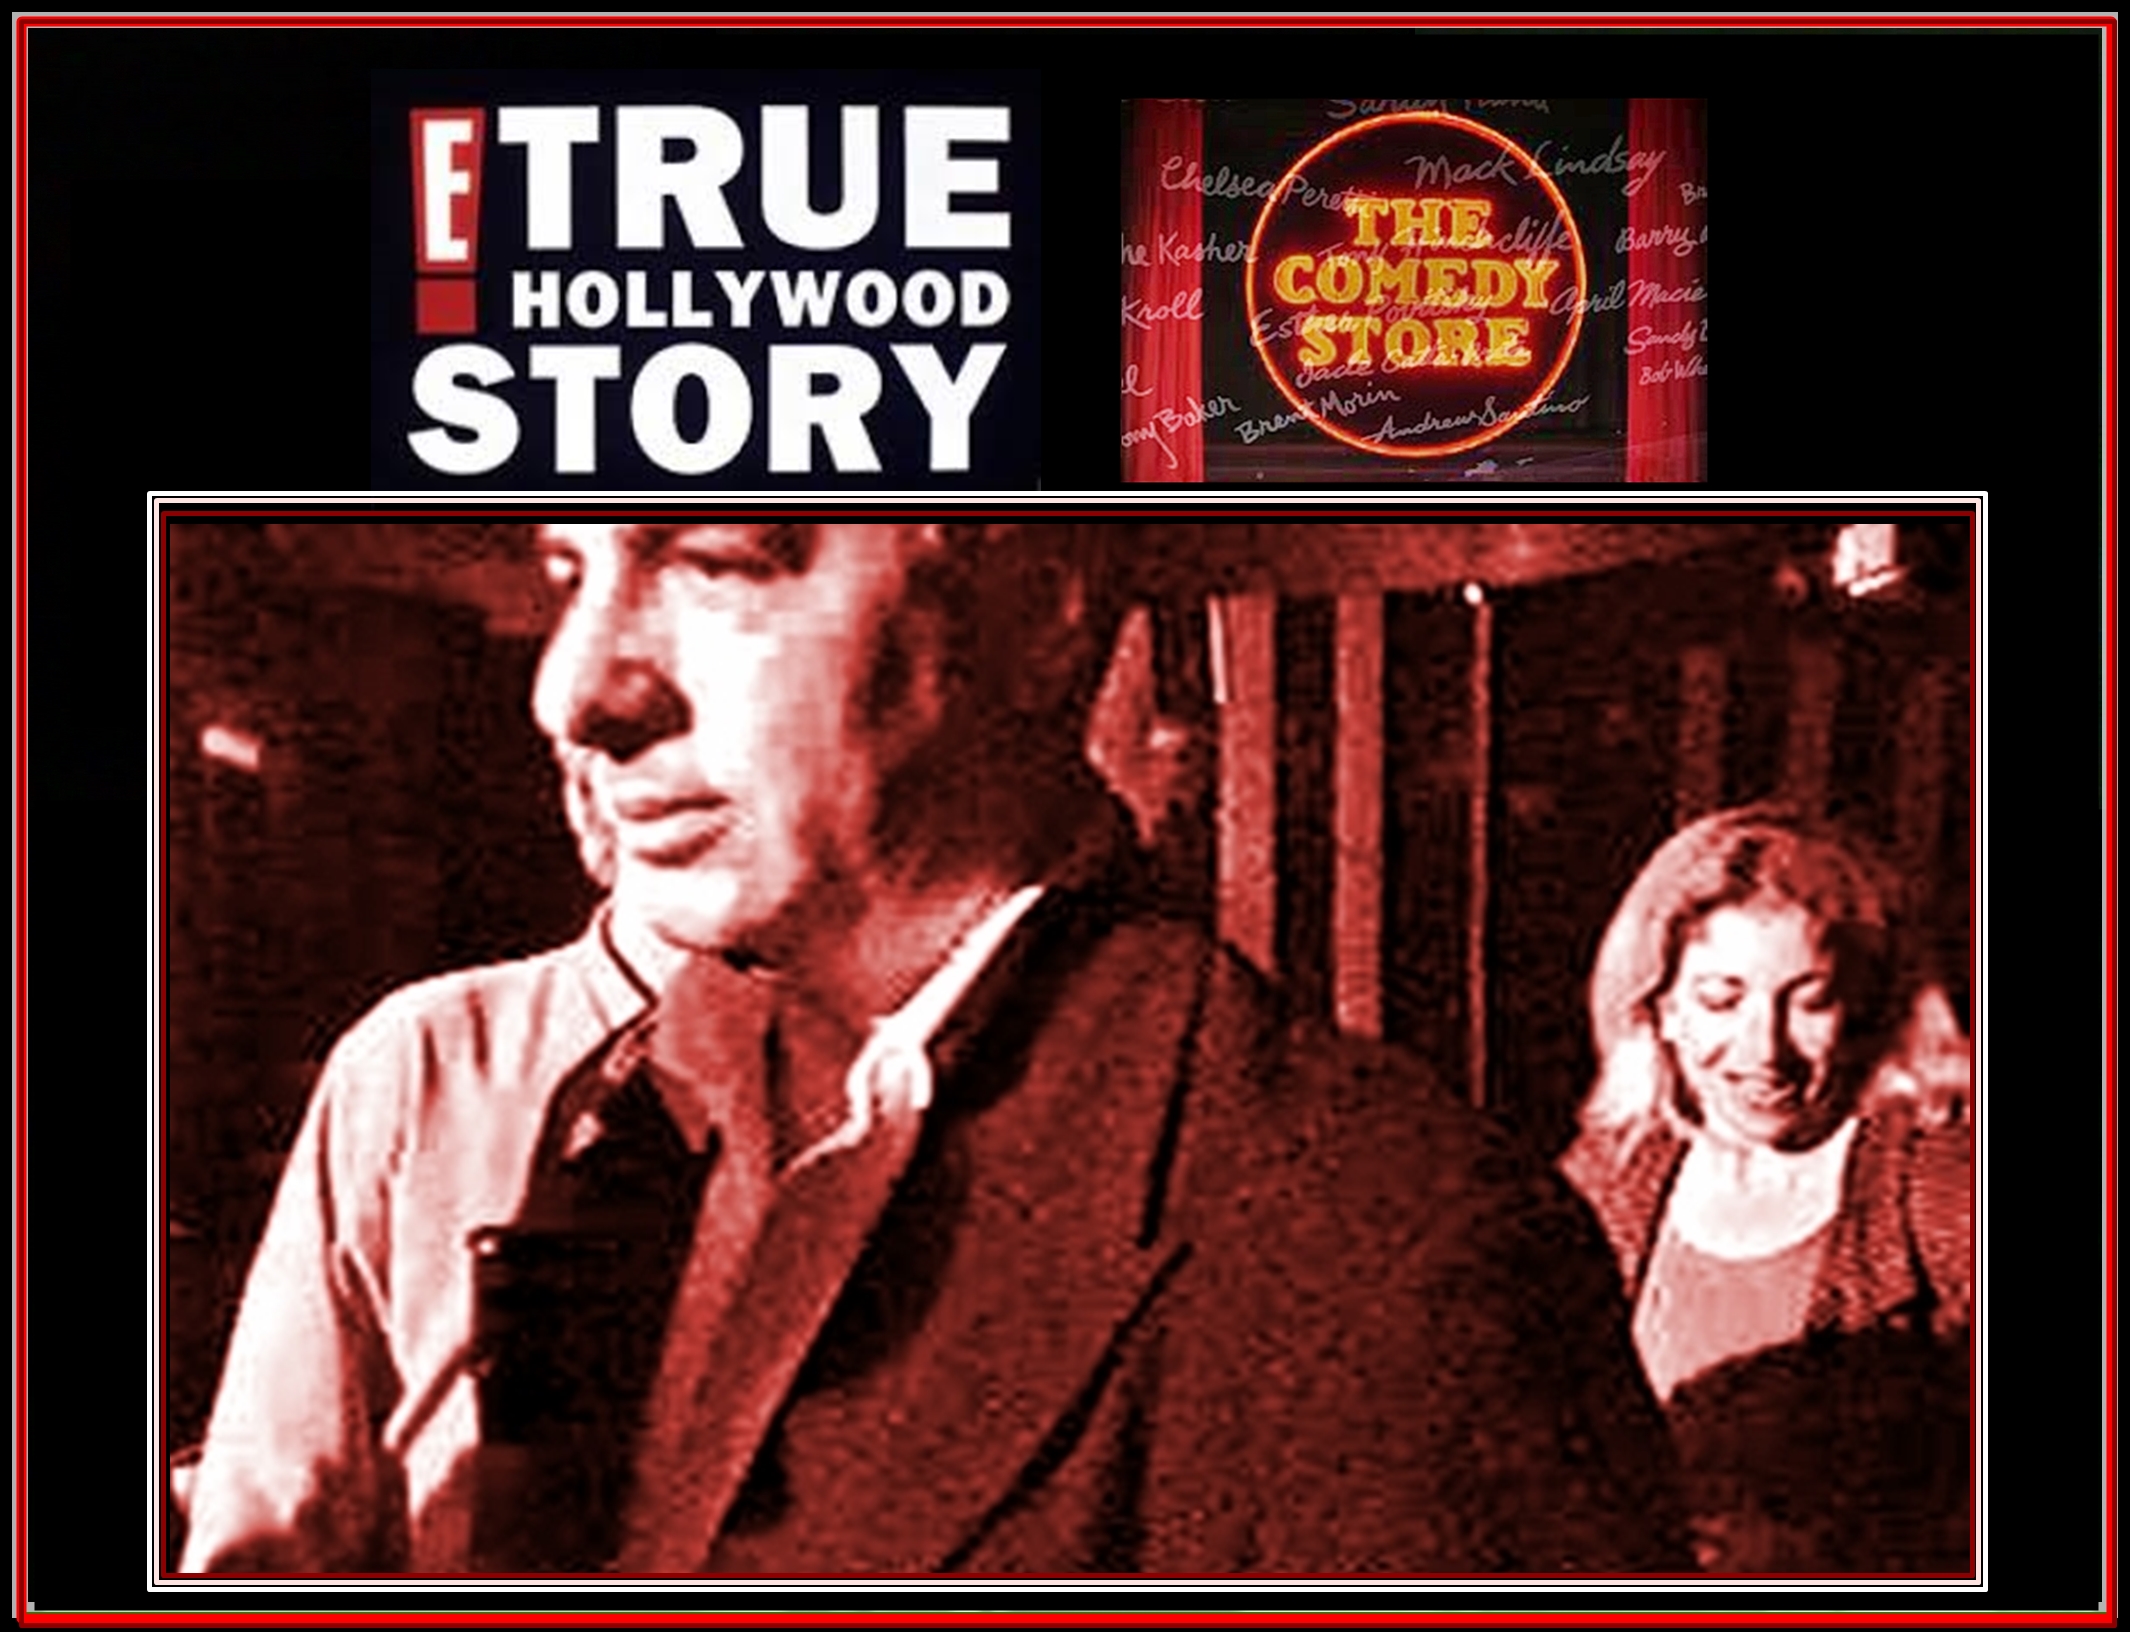 Larry Montz in archived footage of an ISPR investigation at The Comedy Store. Daena Smoller pictured on right. ISPR investigation footage used in 